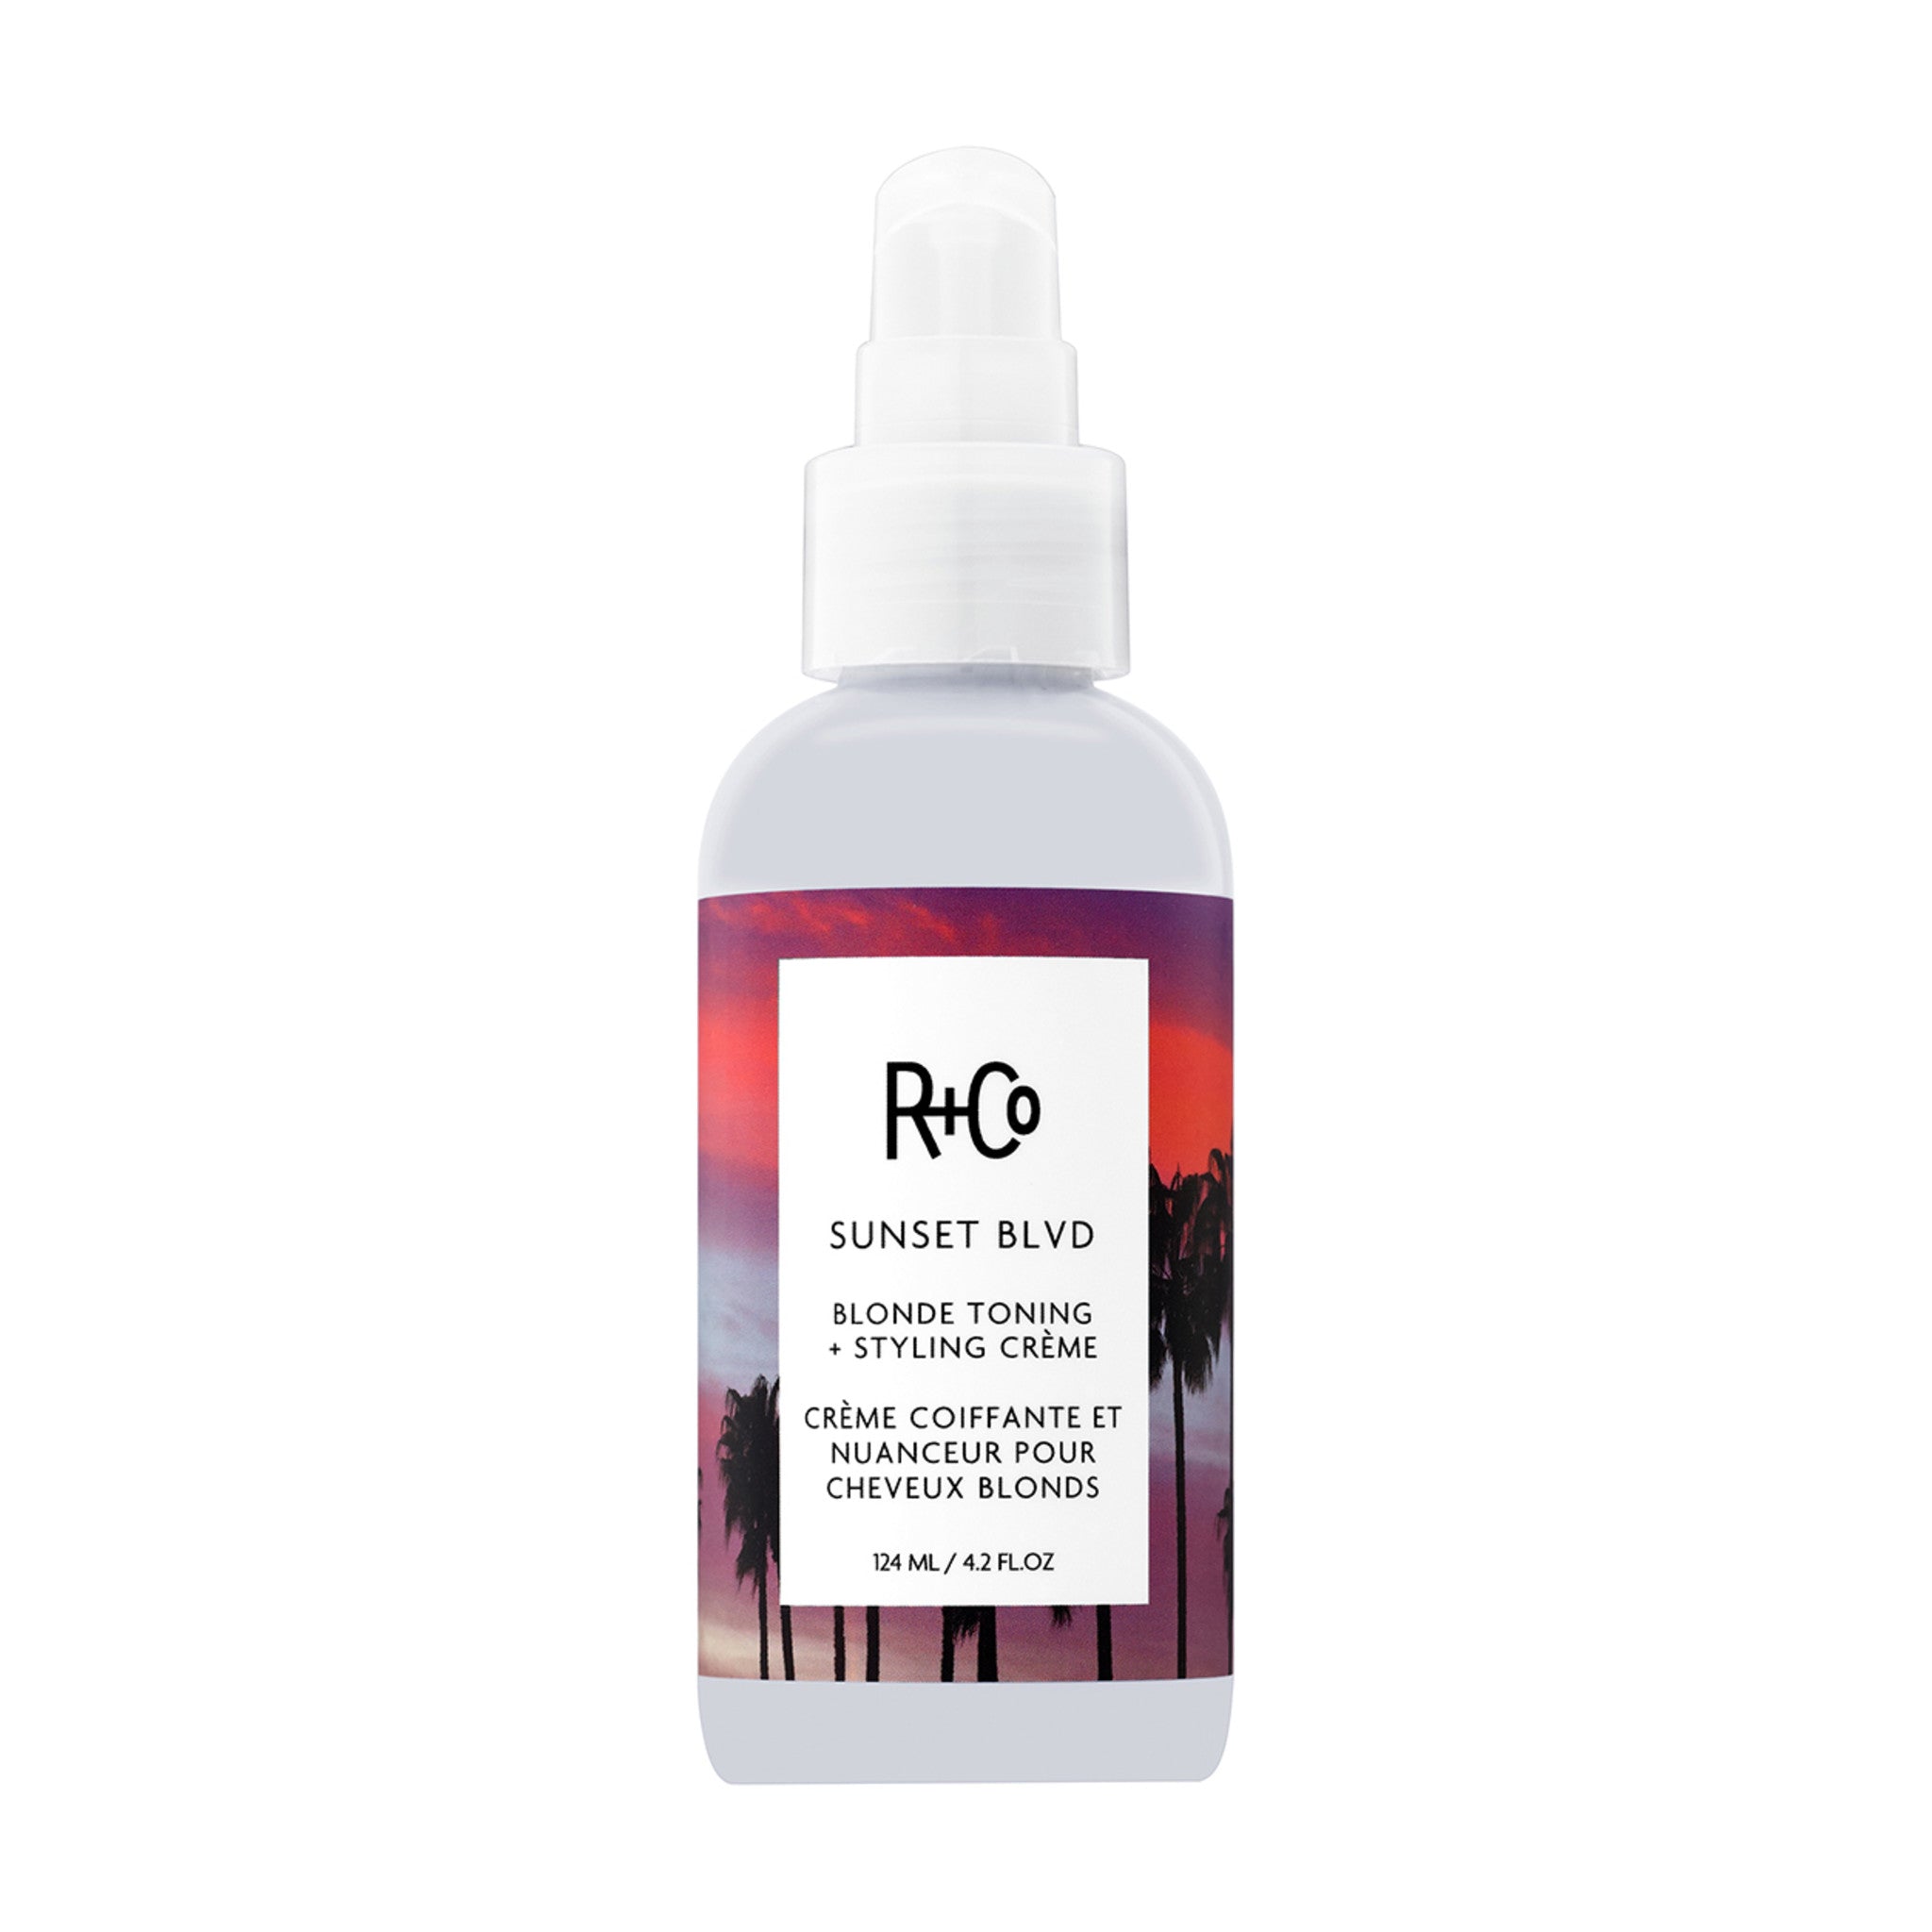 R+Co Sunset Blvd. Blonde Toning Styling Creme main image. This product is for blonde hair